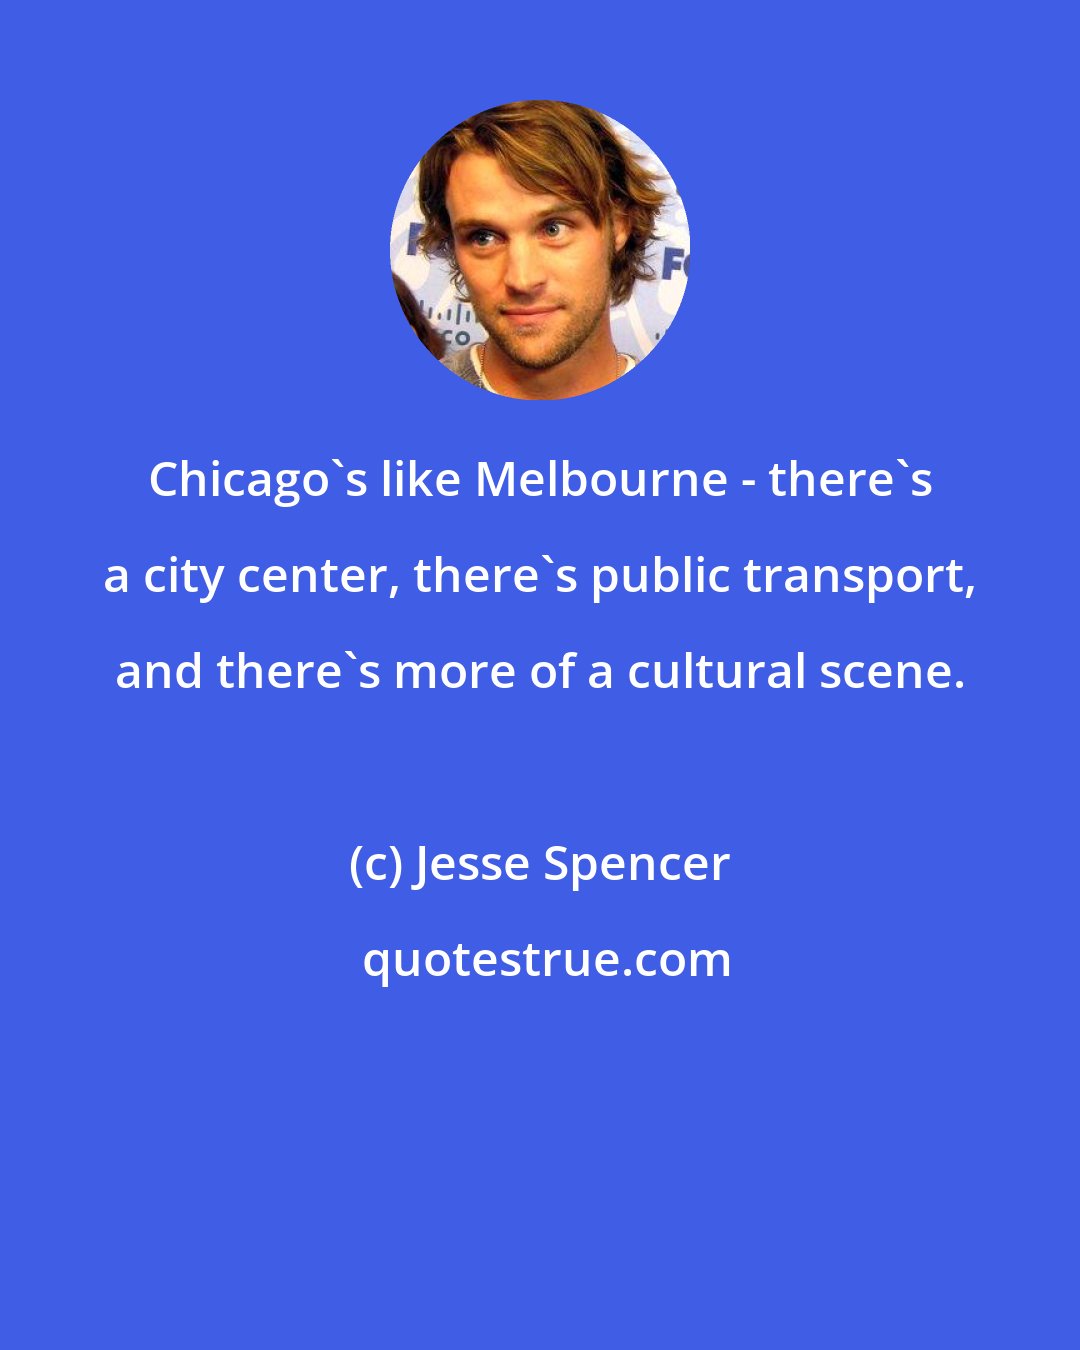 Jesse Spencer: Chicago's like Melbourne - there's a city center, there's public transport, and there's more of a cultural scene.